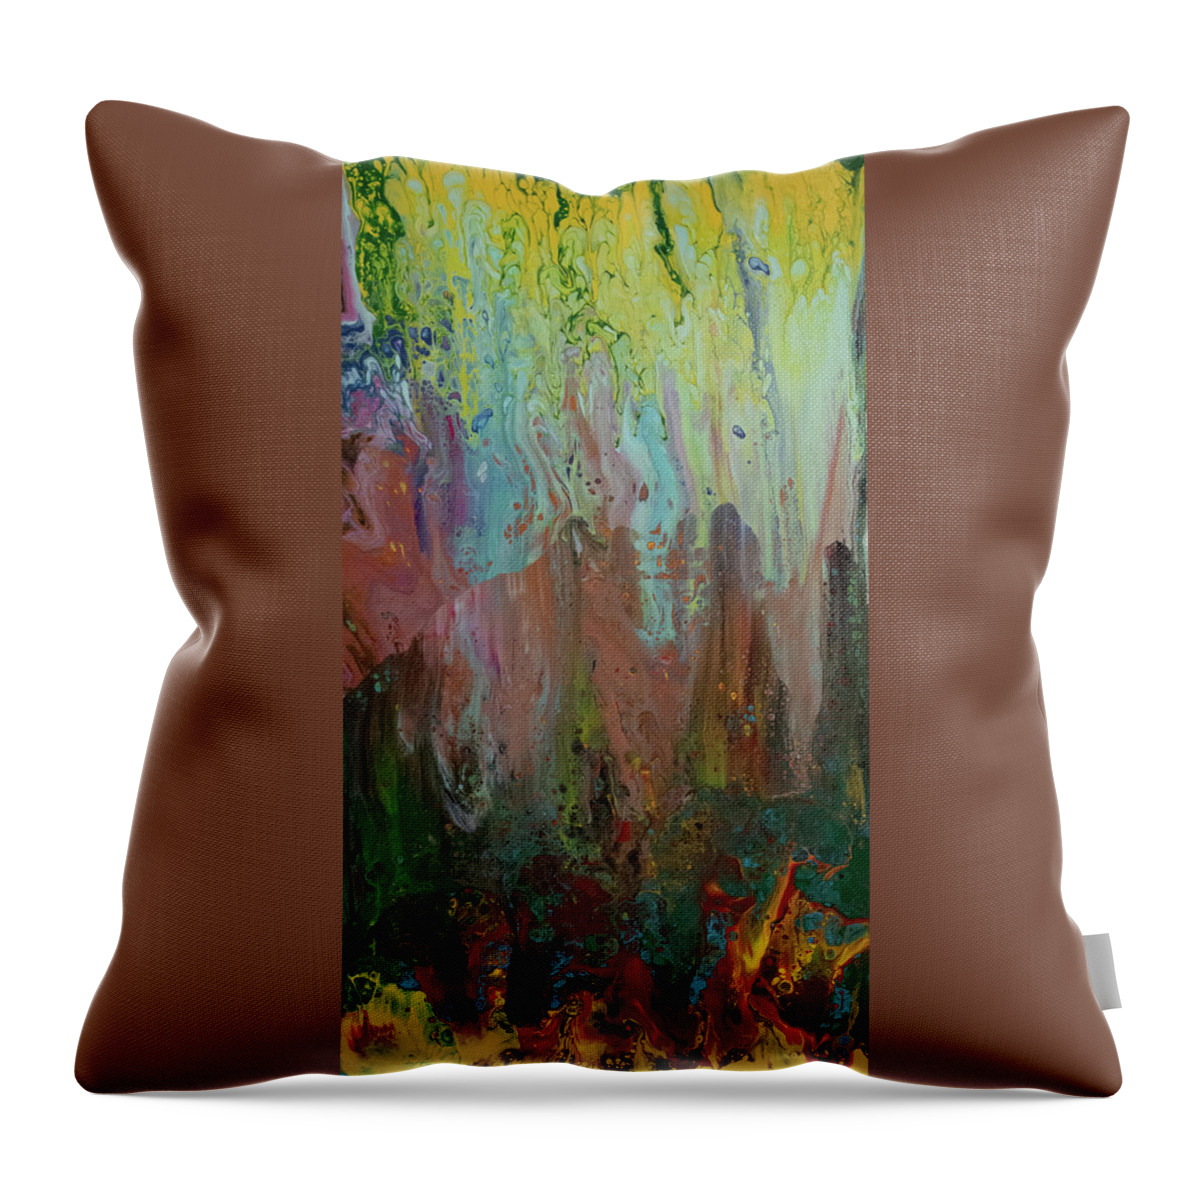 Green Throw Pillow featuring the mixed media Ascending by Aimee Bruno